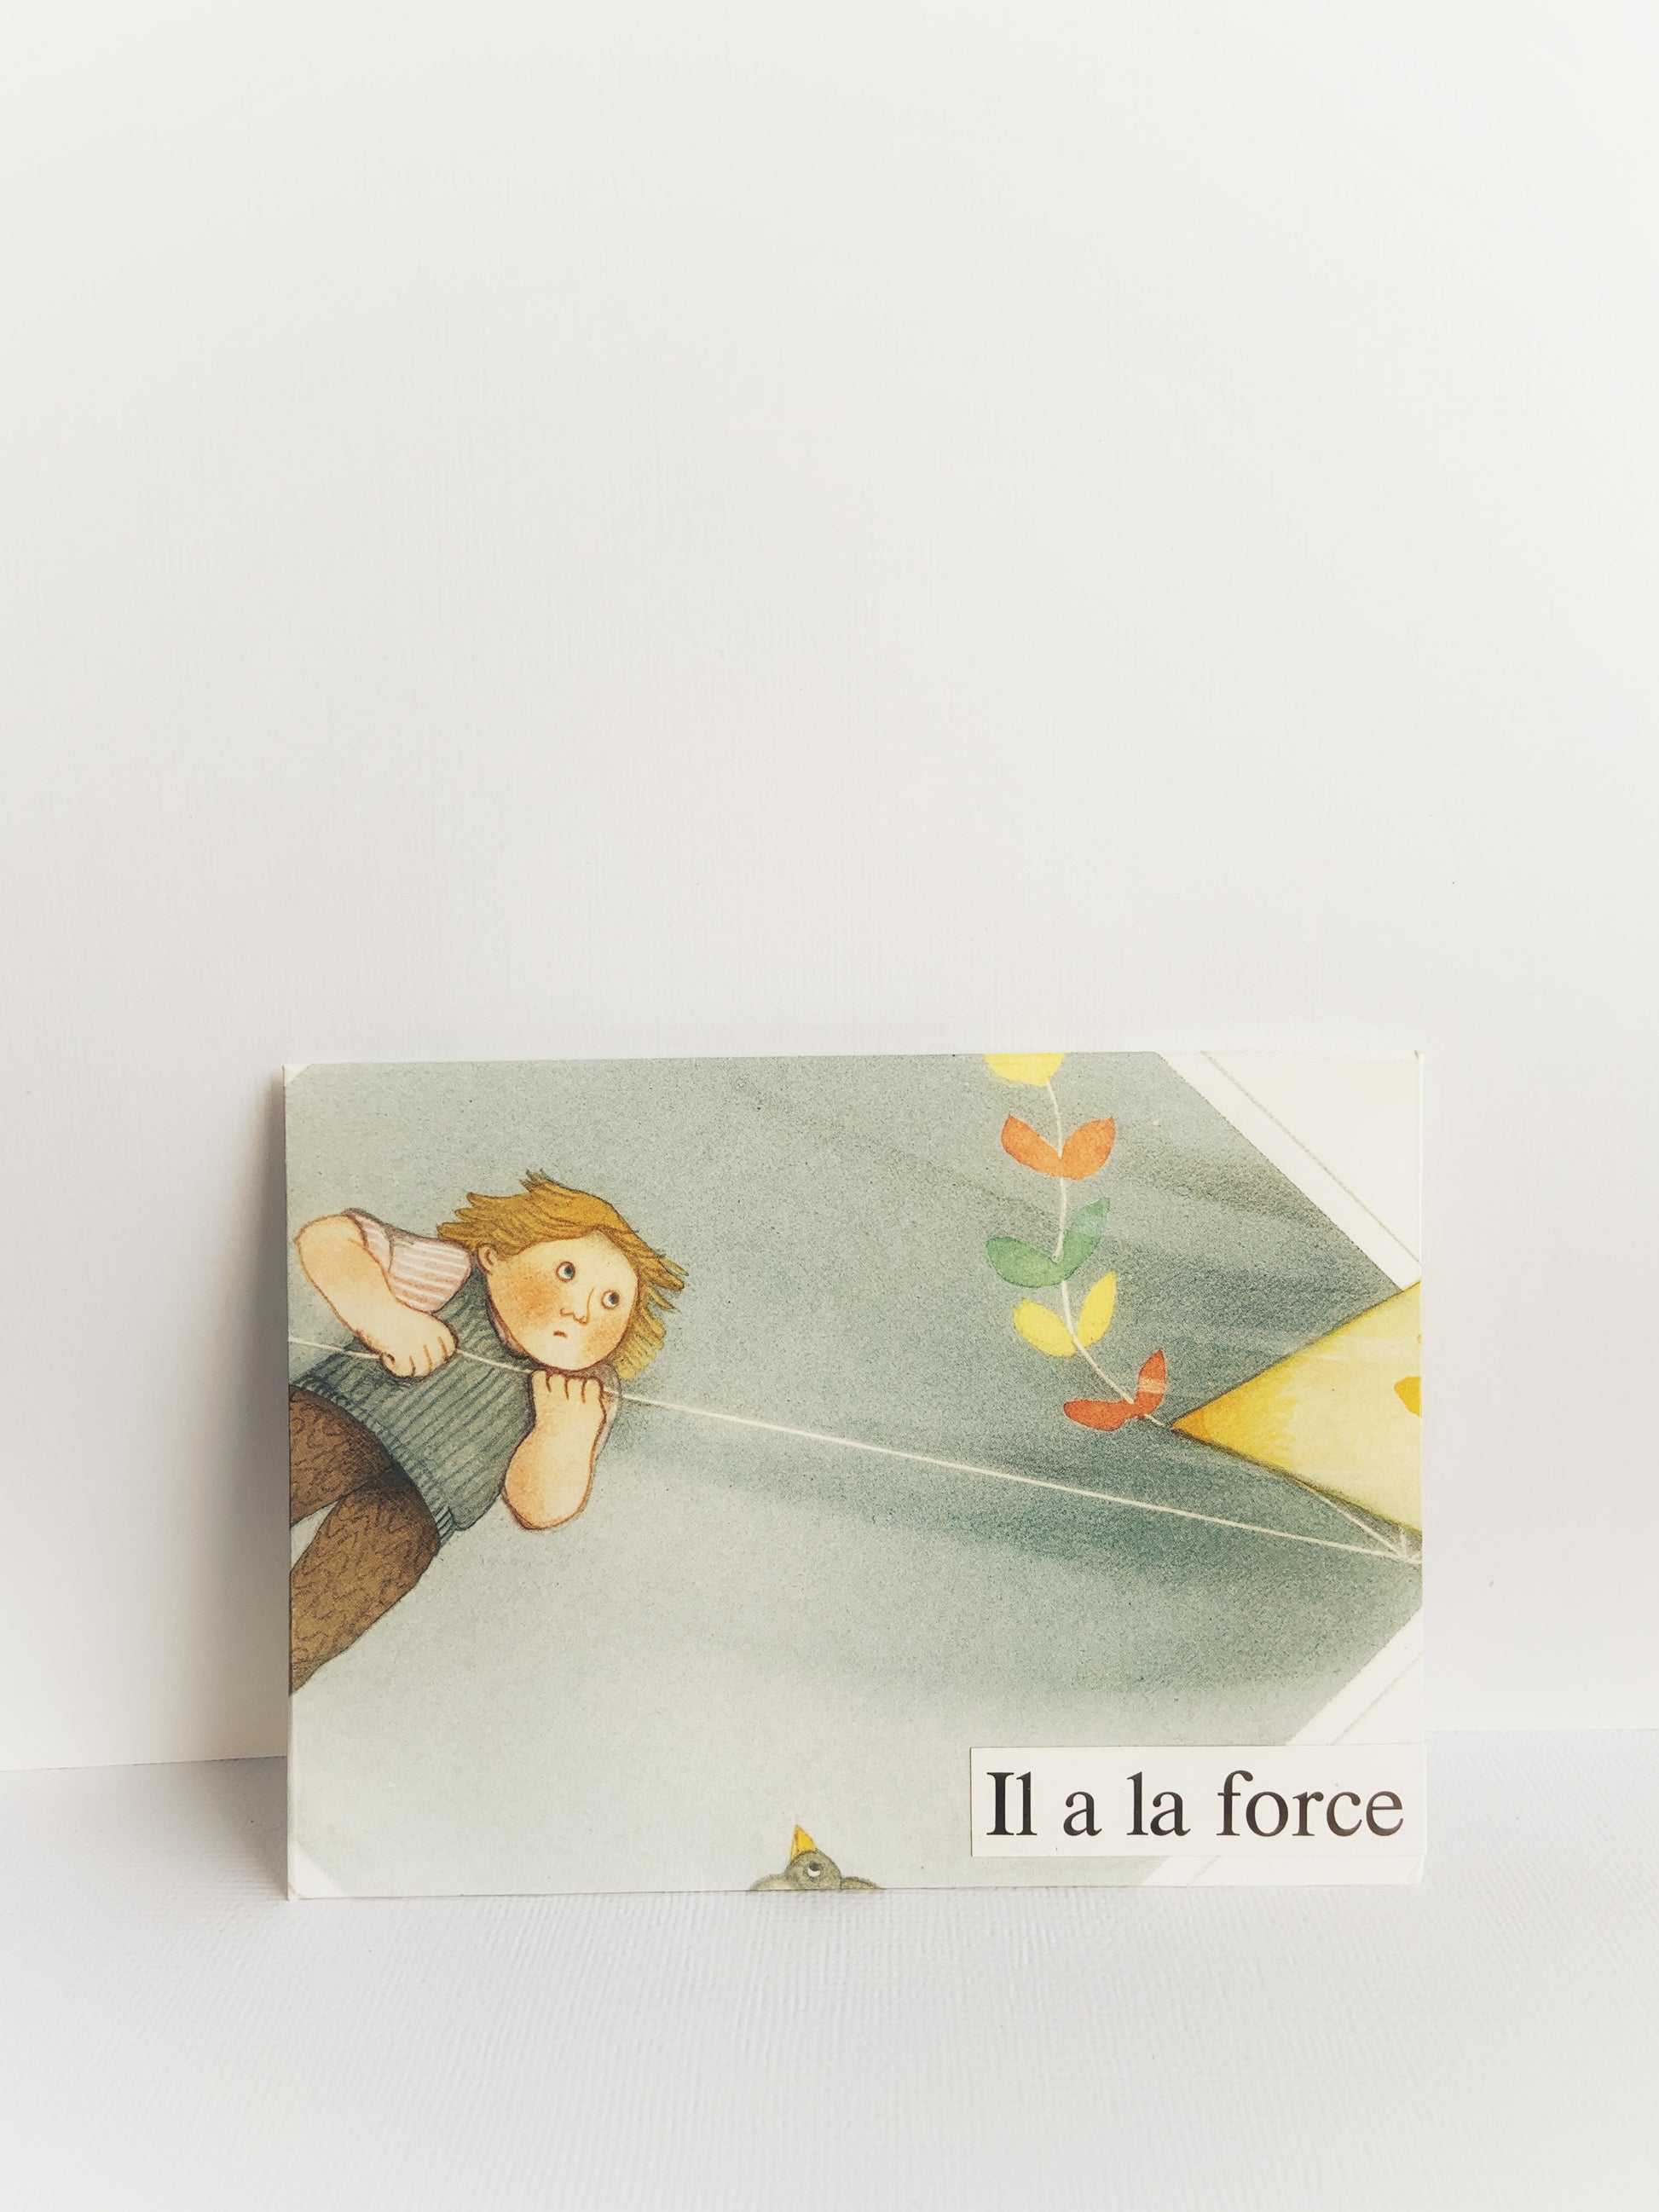 The front of a handmade envelope that has a young boy on the front flying a colorful kite and has 'Il a la force' on the bottom.